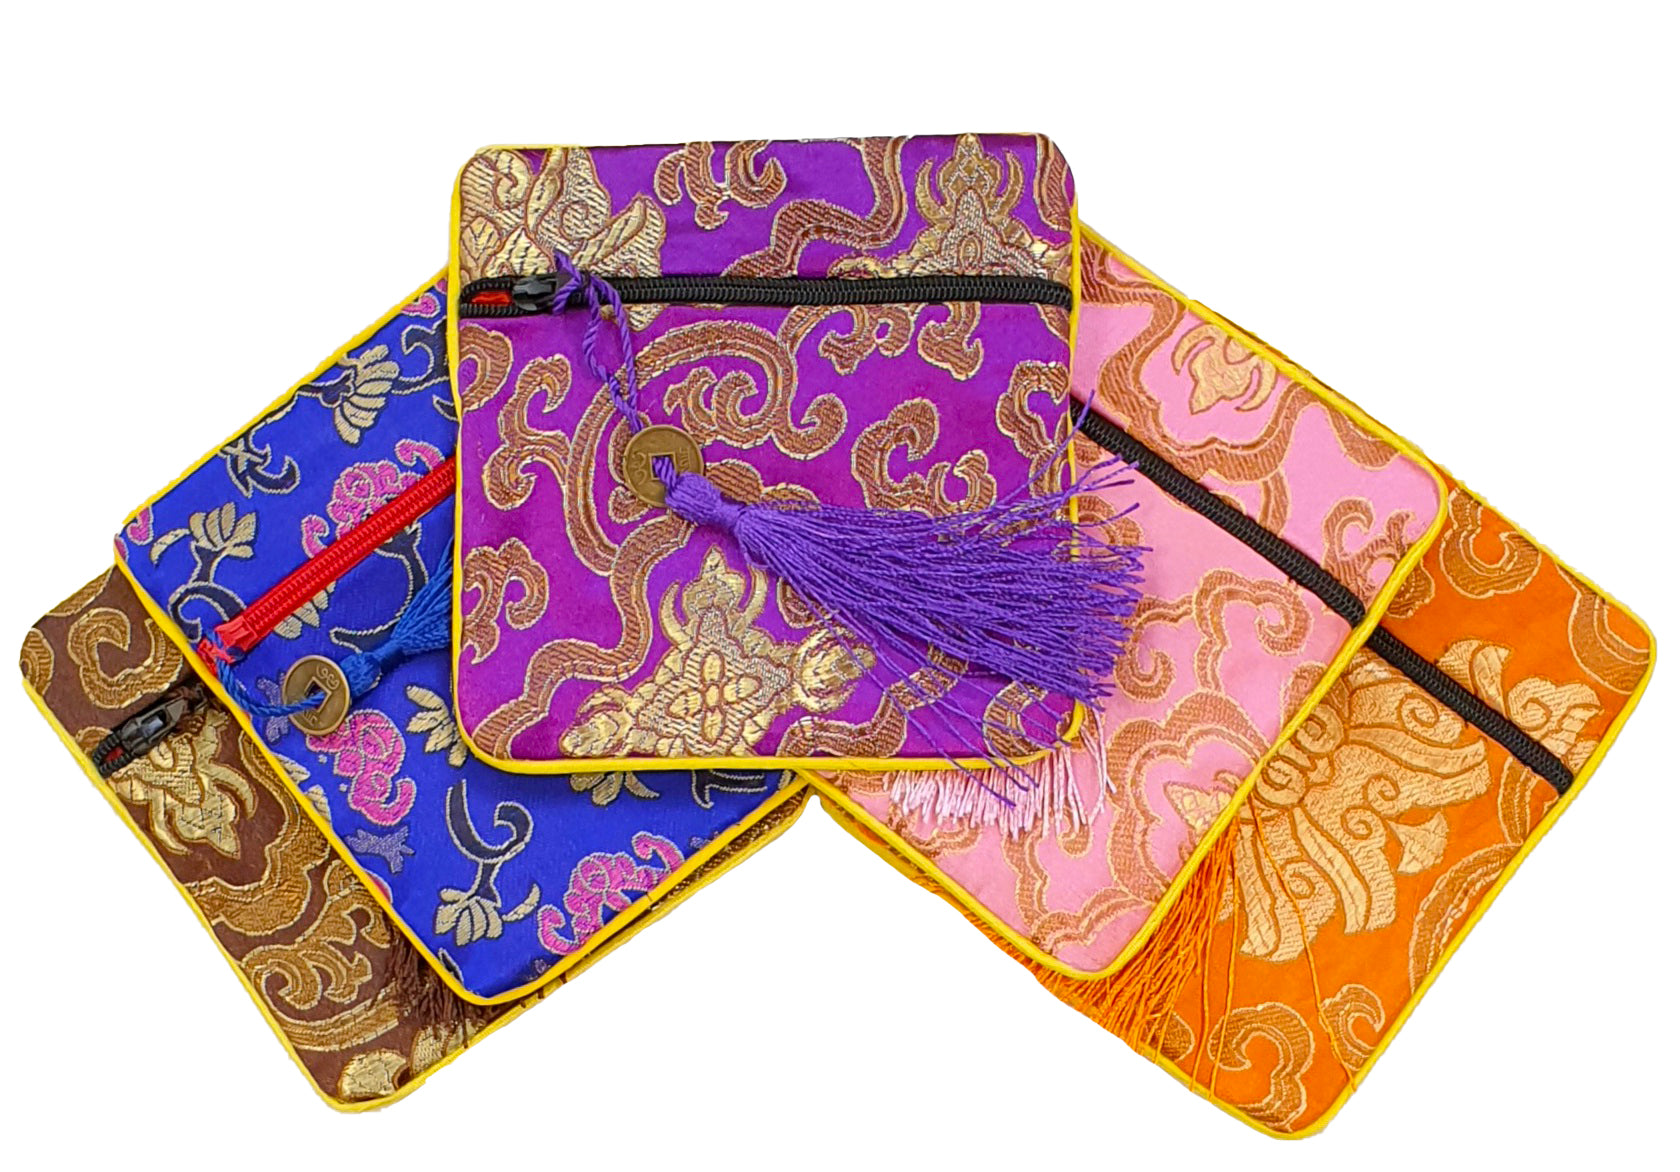 Upcycled Silk Brocade Sari Bags with I-chi coin